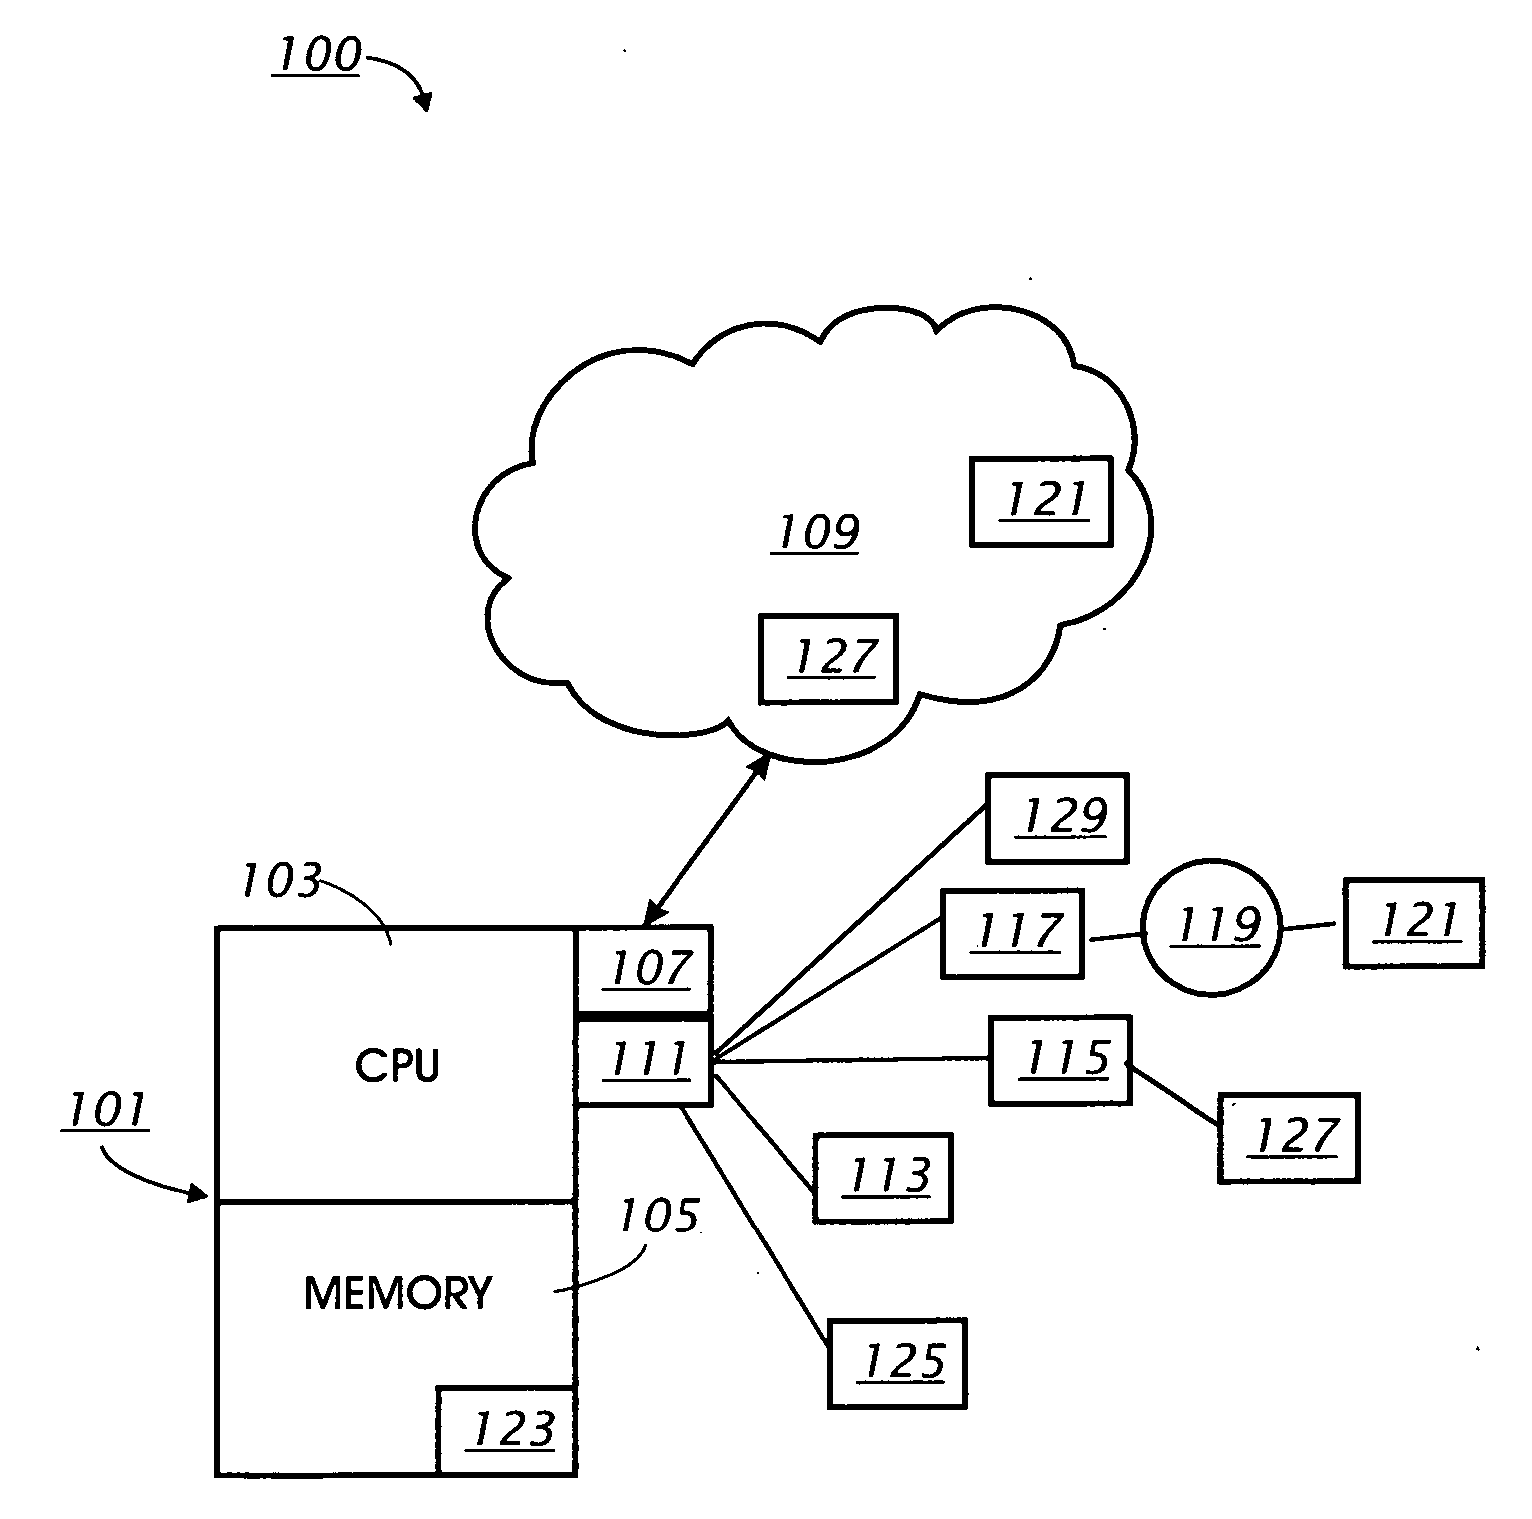 Method, apparatus, and program product for clustering entities in a persistent virtual environment